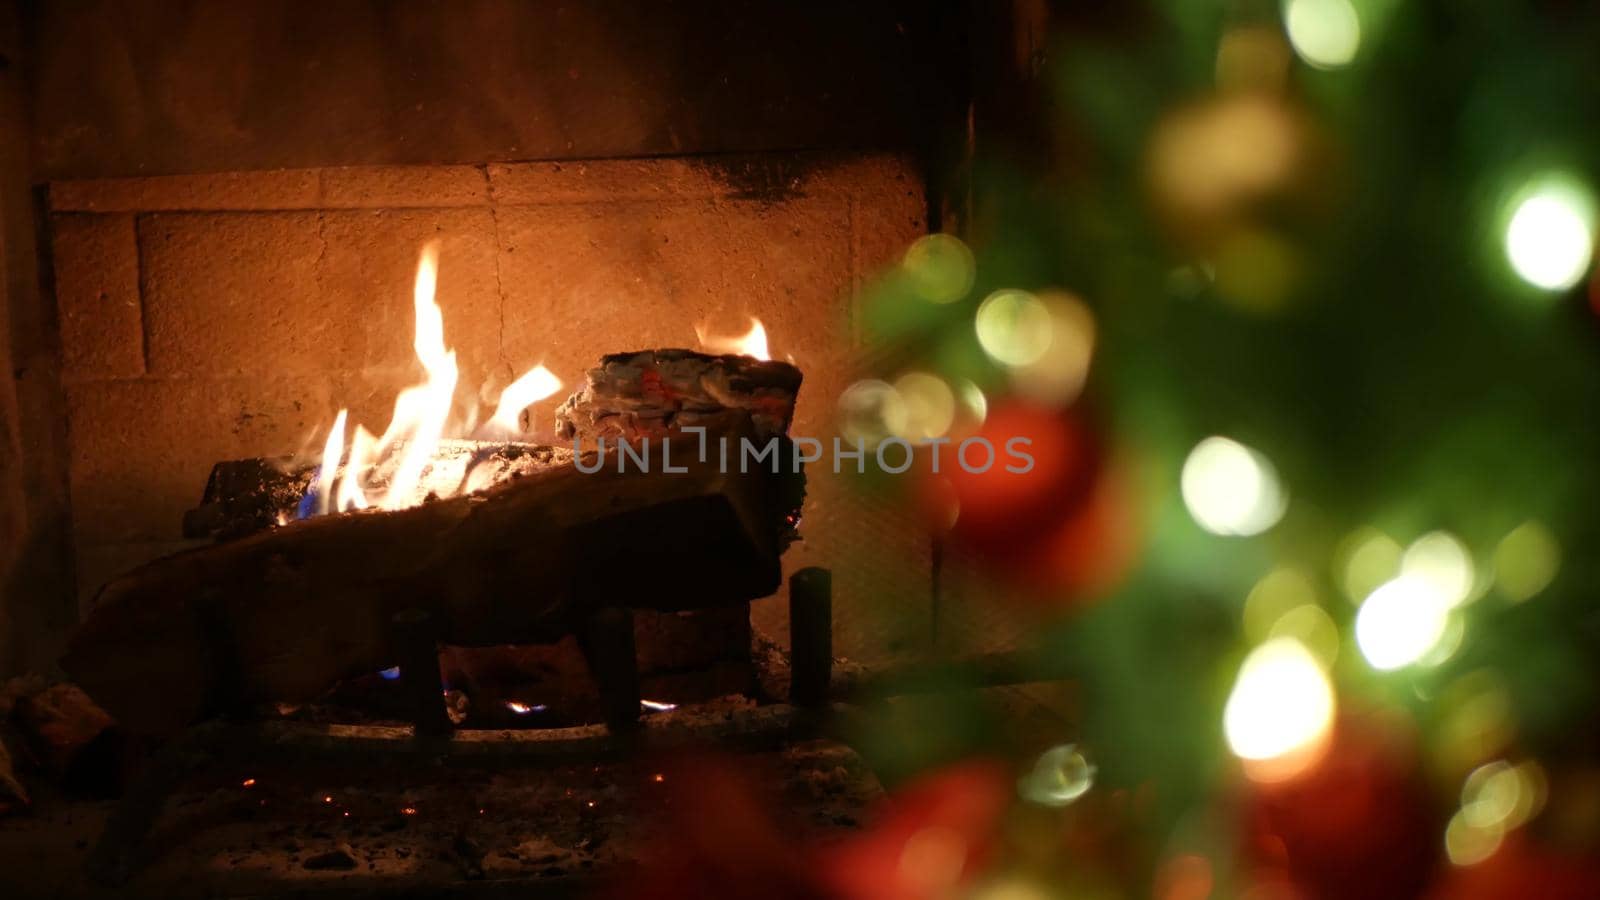 Christmas tree lights by fire in fireplace, New Years Eve or Xmas decoration of pine or fir with red balls. Festive fireside on winter christmastime holiday. Cozy place by burning firewood in december